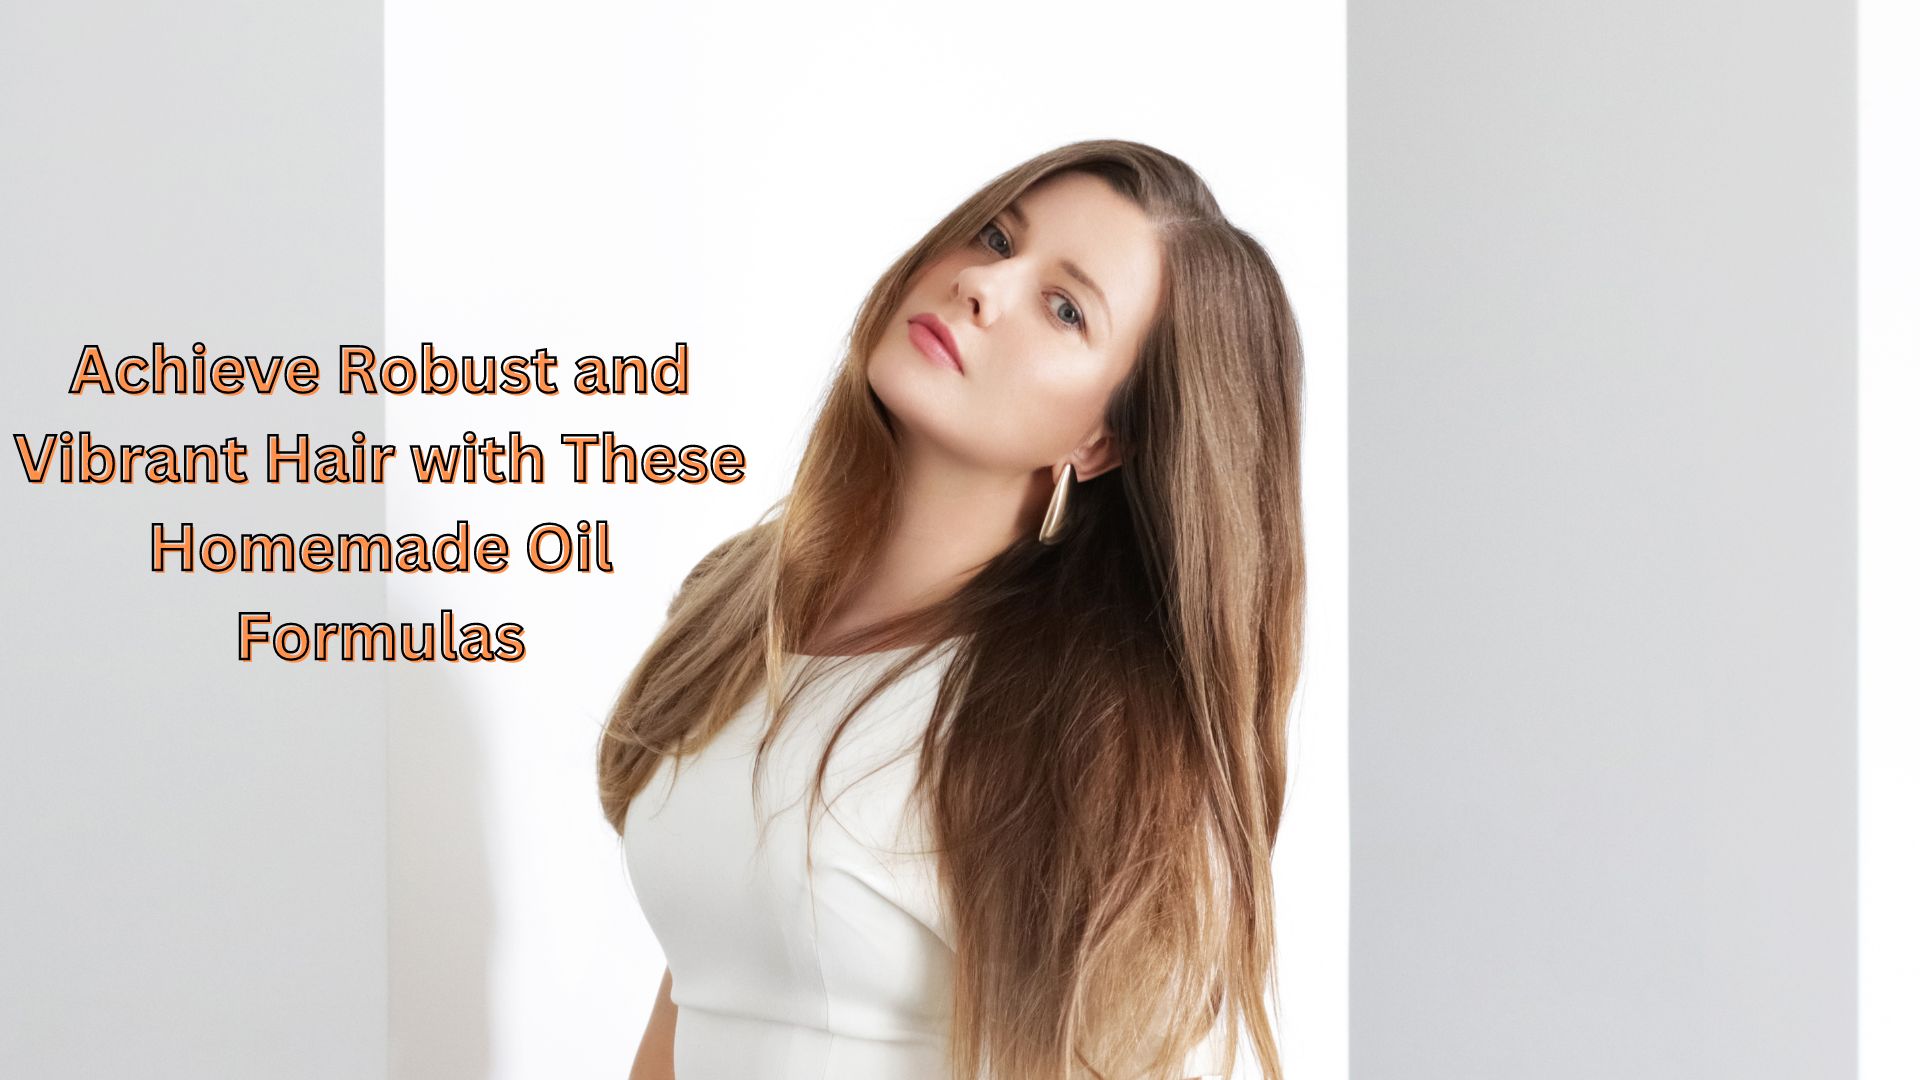 Achieve Robust and Vibrant Hair with These Homemade Oil Formulas